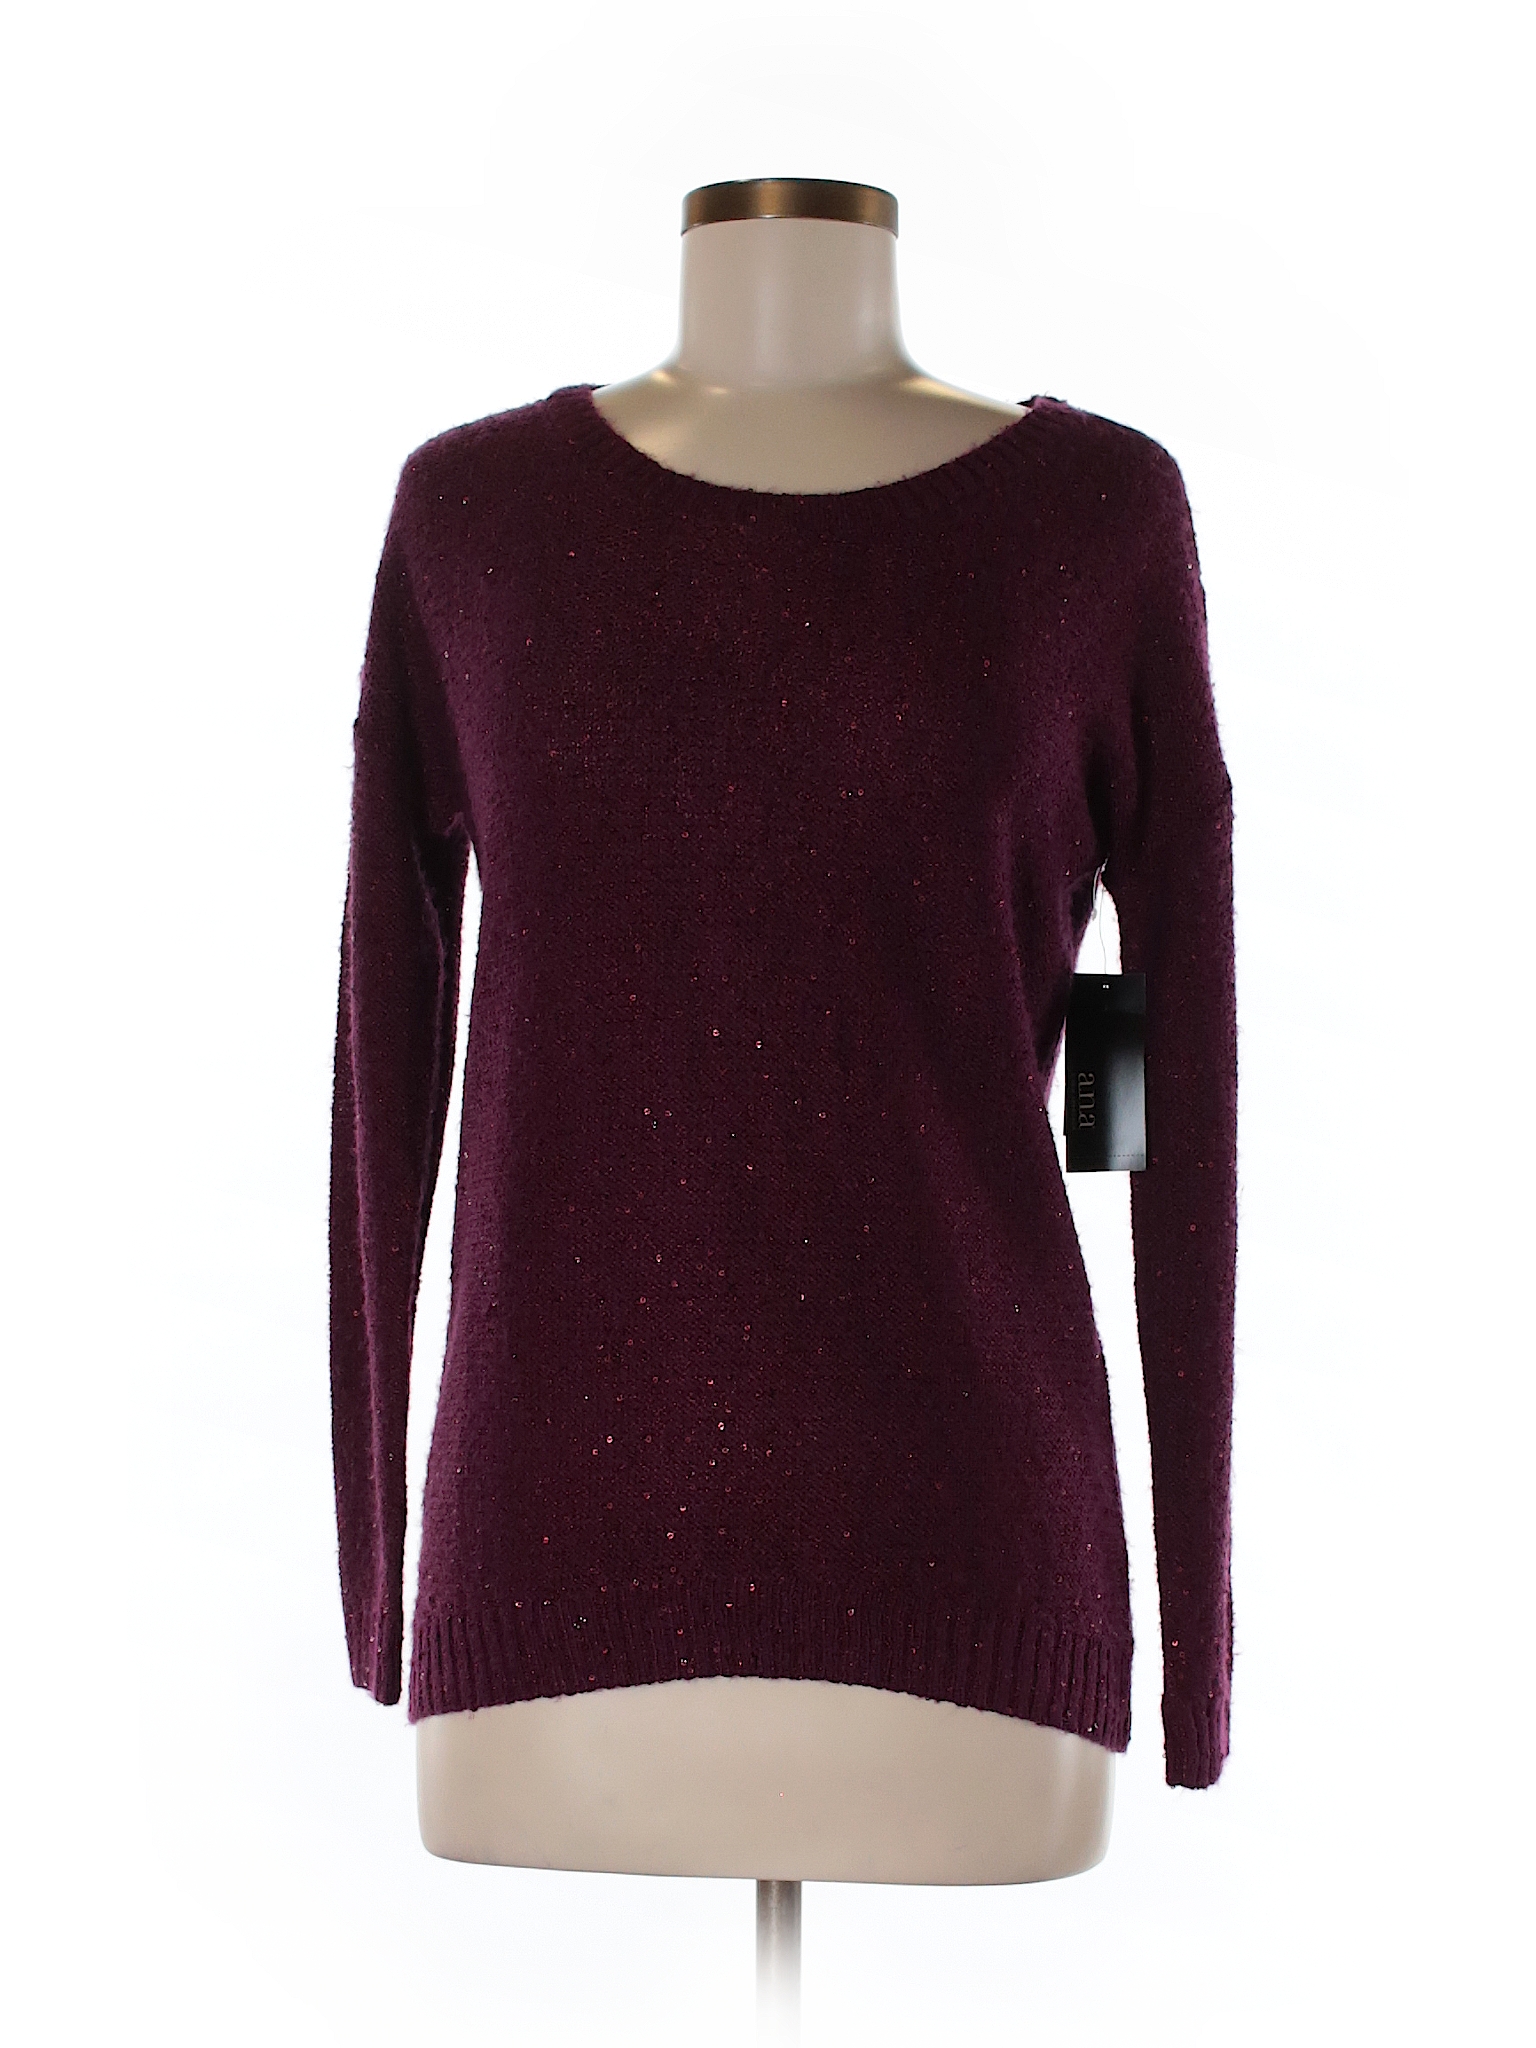 A.N.A Pullover Sweater - 72% off only on thredUP